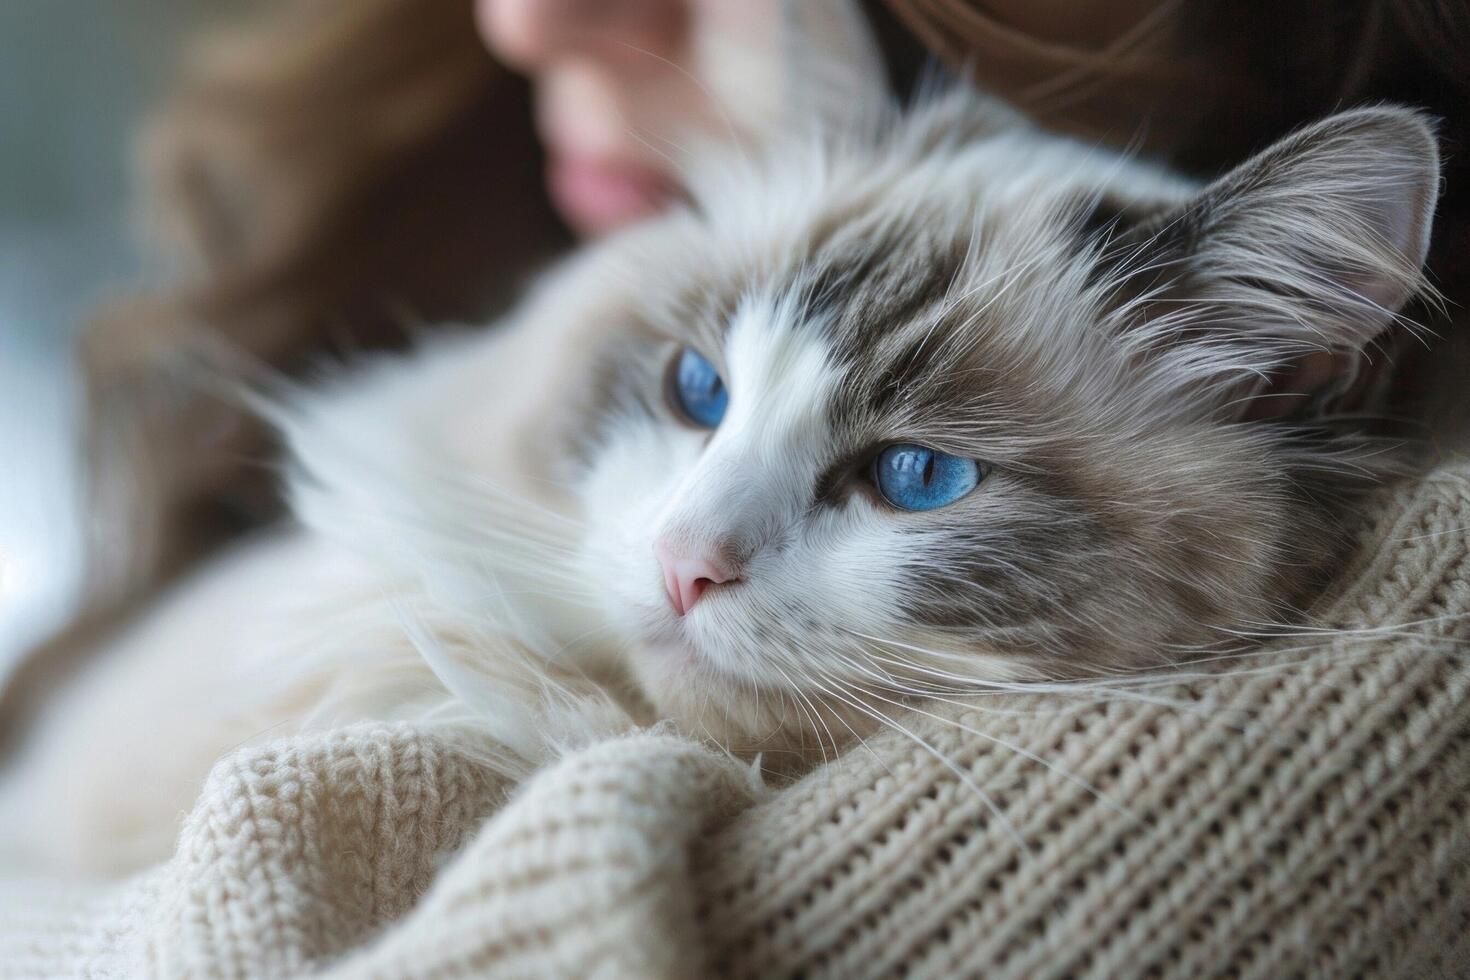 A serene Ragdoll cat lounging in its owner's arms, its blue eyes gazing lovingly at its human companion photo